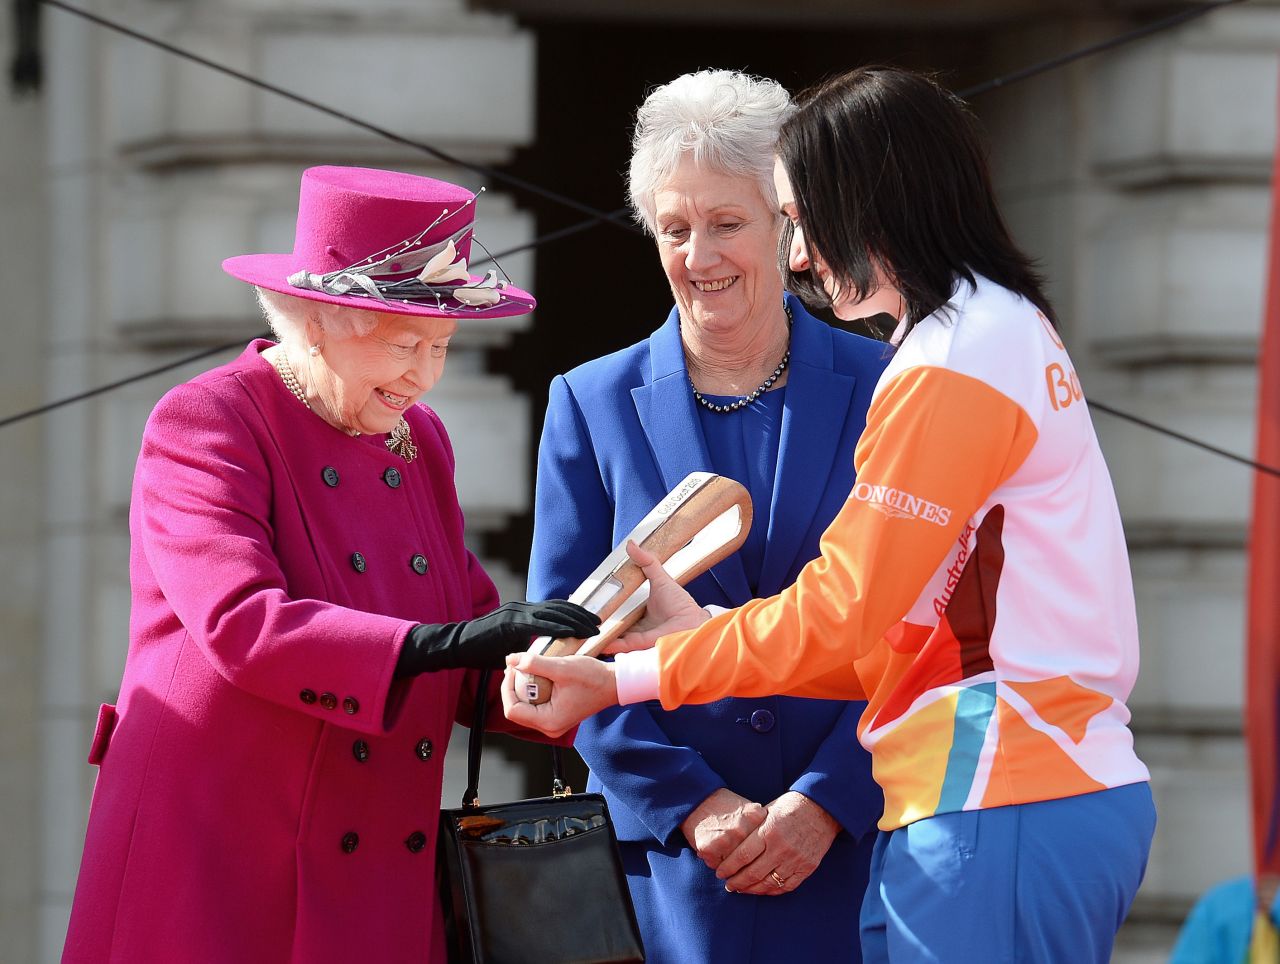 While not in attendance, her speech will be delivered from a written note inside the Queen's Baton Relay, which has traveled throughout the Commonwealth before the Games.